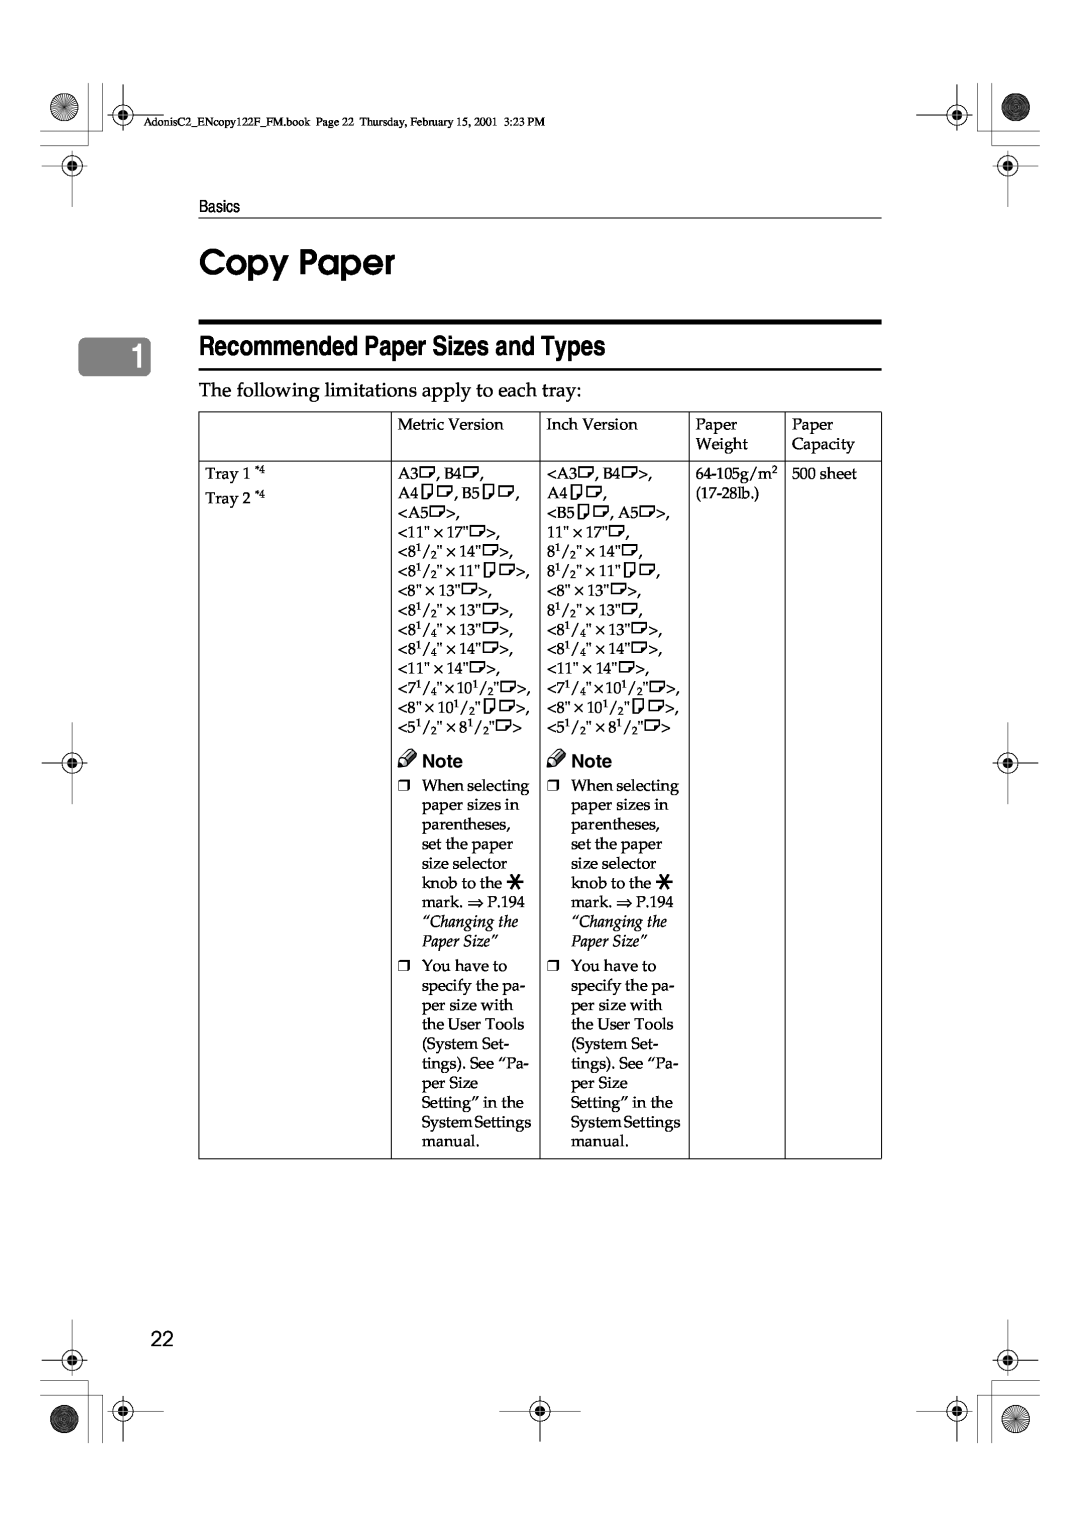 Savin 2535/2535p, 3502/3502p, 4502/4502p Copy Paper, Recommended Paper Sizes and Types, Basics, “Changing the, Paper Size” 